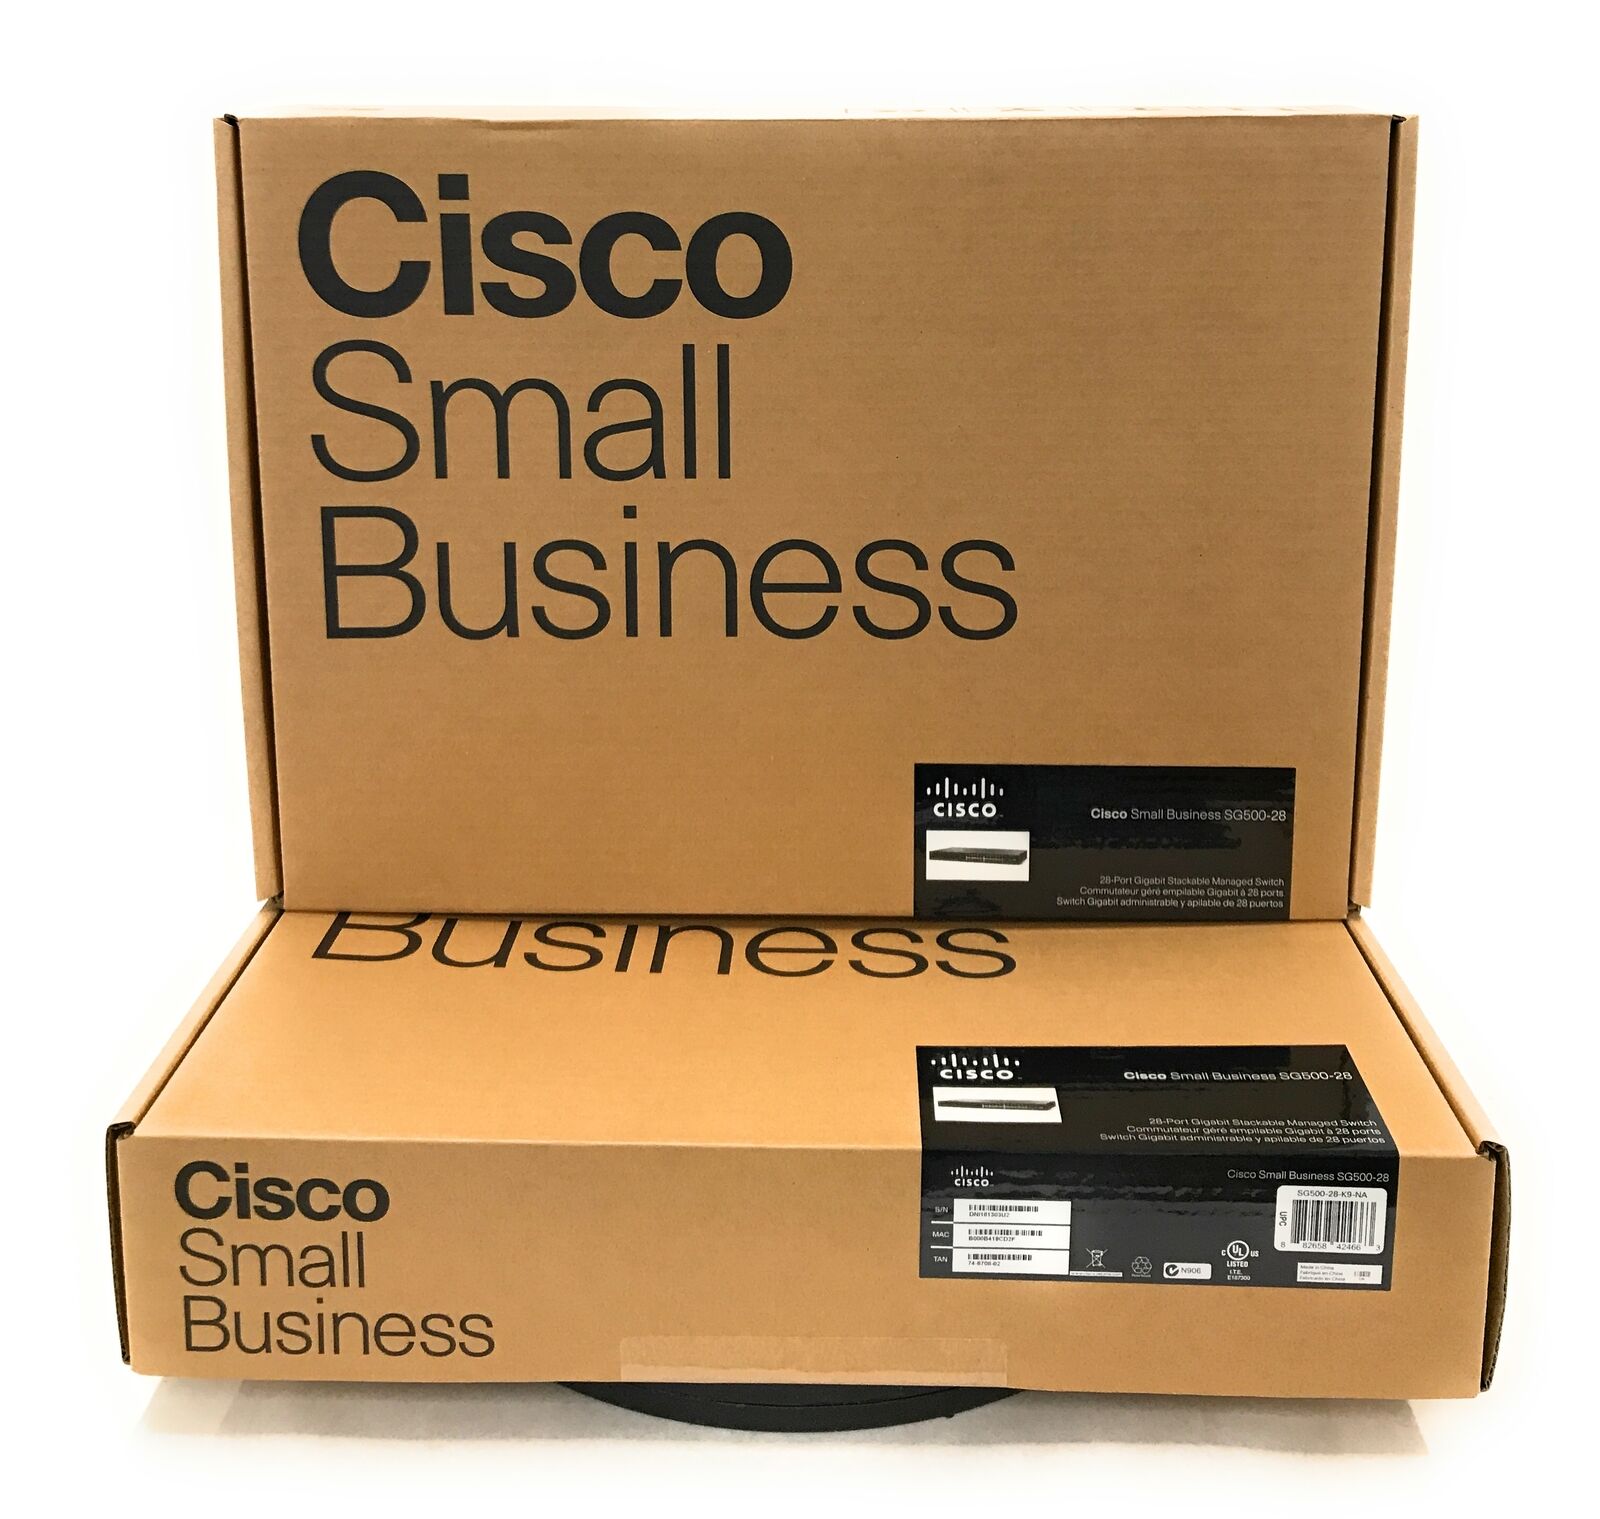 NEW Cisco 2-Combo SG500-28 Stackable Managed Switch with 28 Ports/Switch, SEALED